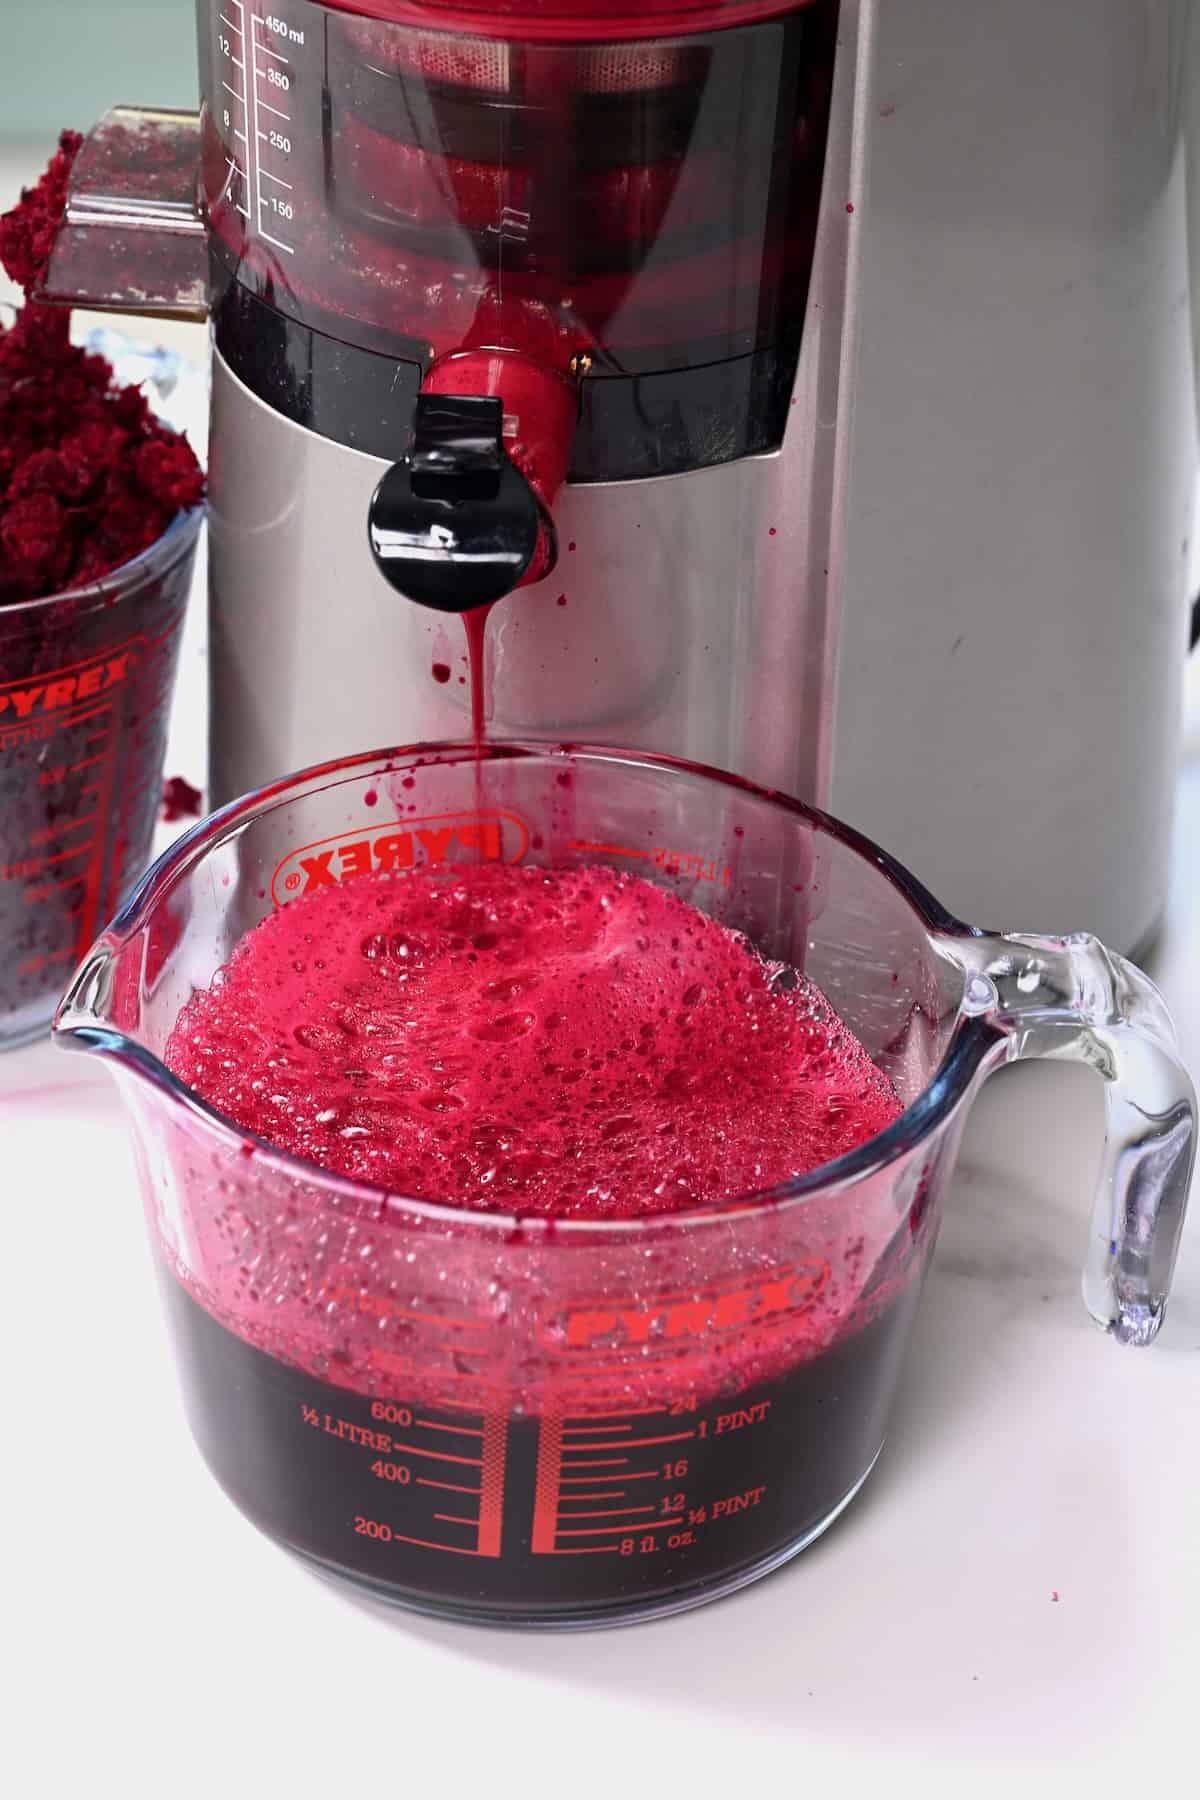 Juicing beetroot with a juicer